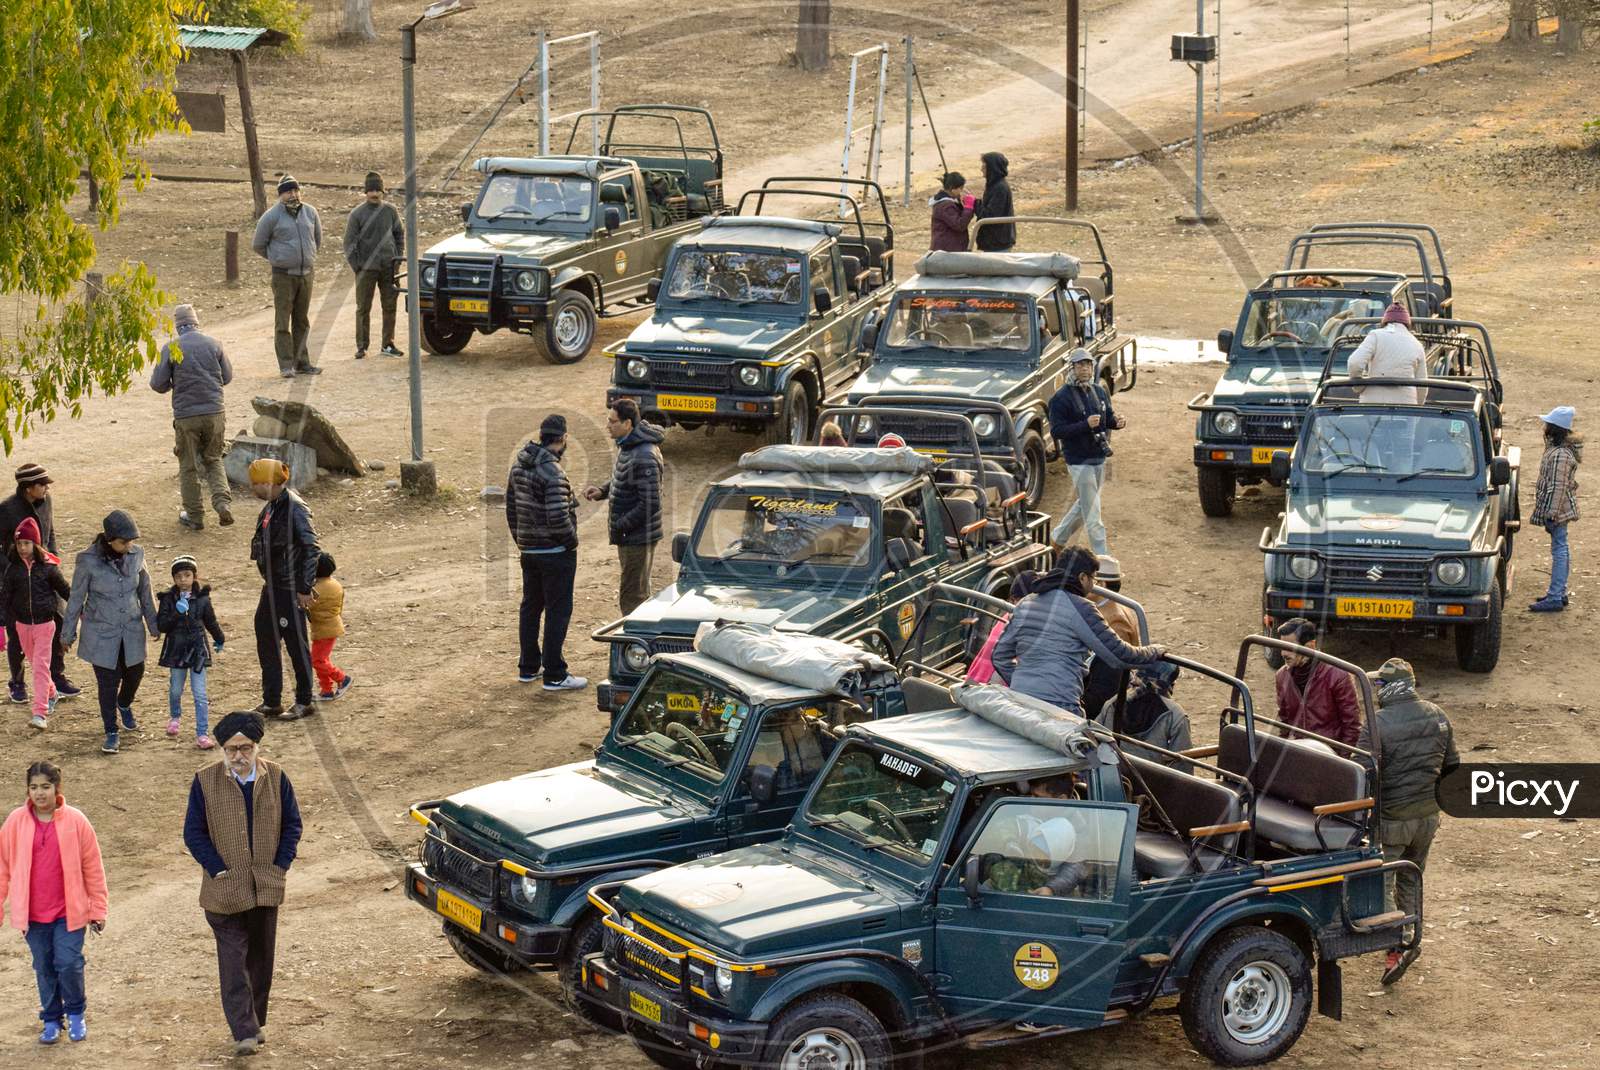 Jim Corbett, Uttranchal / India - February 09 2019: Maruti Gypy assembling for Jungle Safari. Maruti Gypsy is most commonly used vehicle during off road safari ride